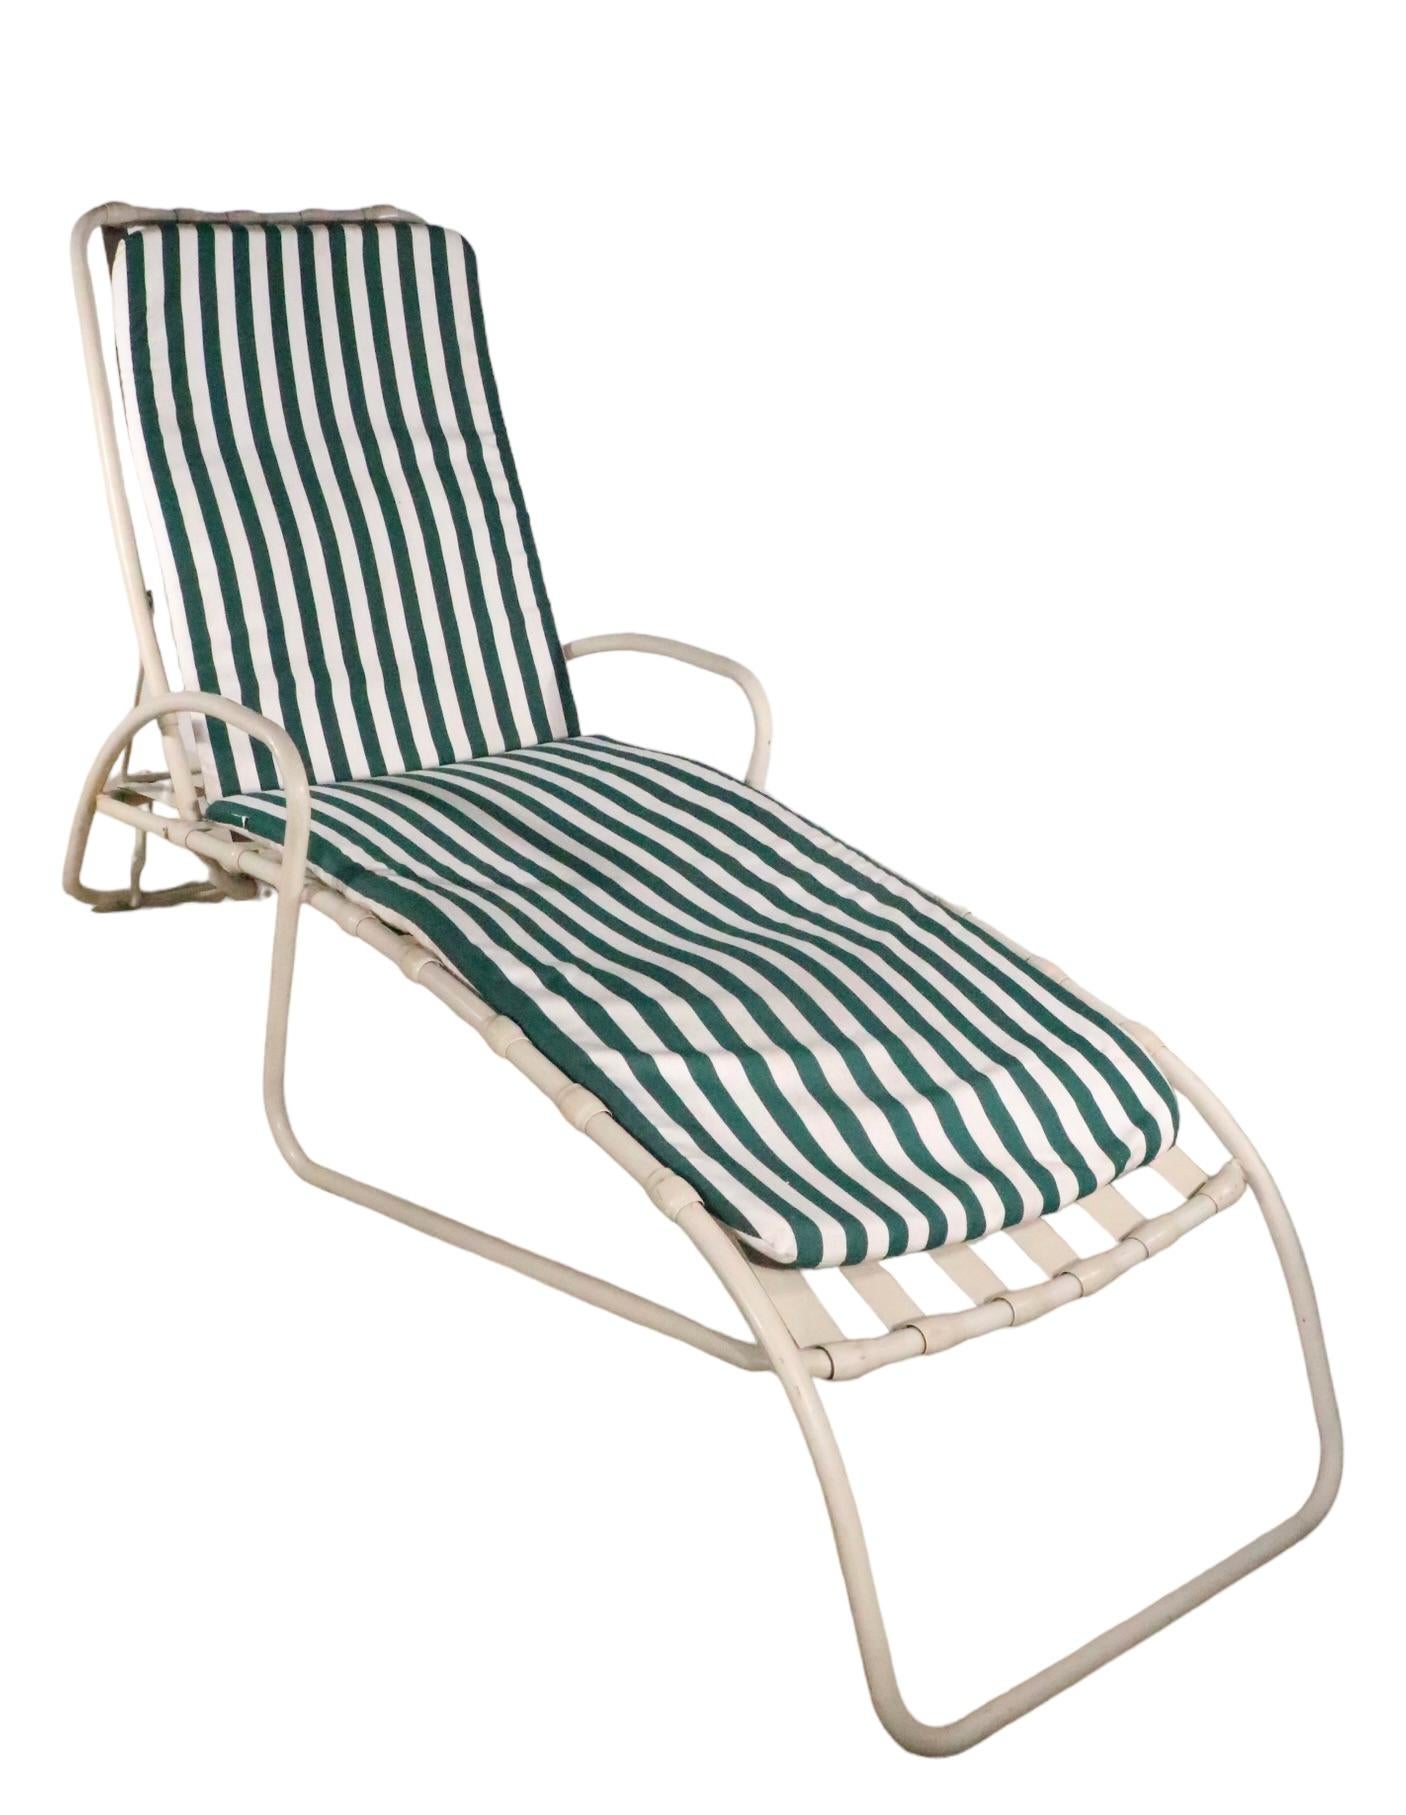 Vintage Patio Poolside Garden  Brown Jordan Reclining Chaise Lounge  In Good Condition For Sale In New York, NY